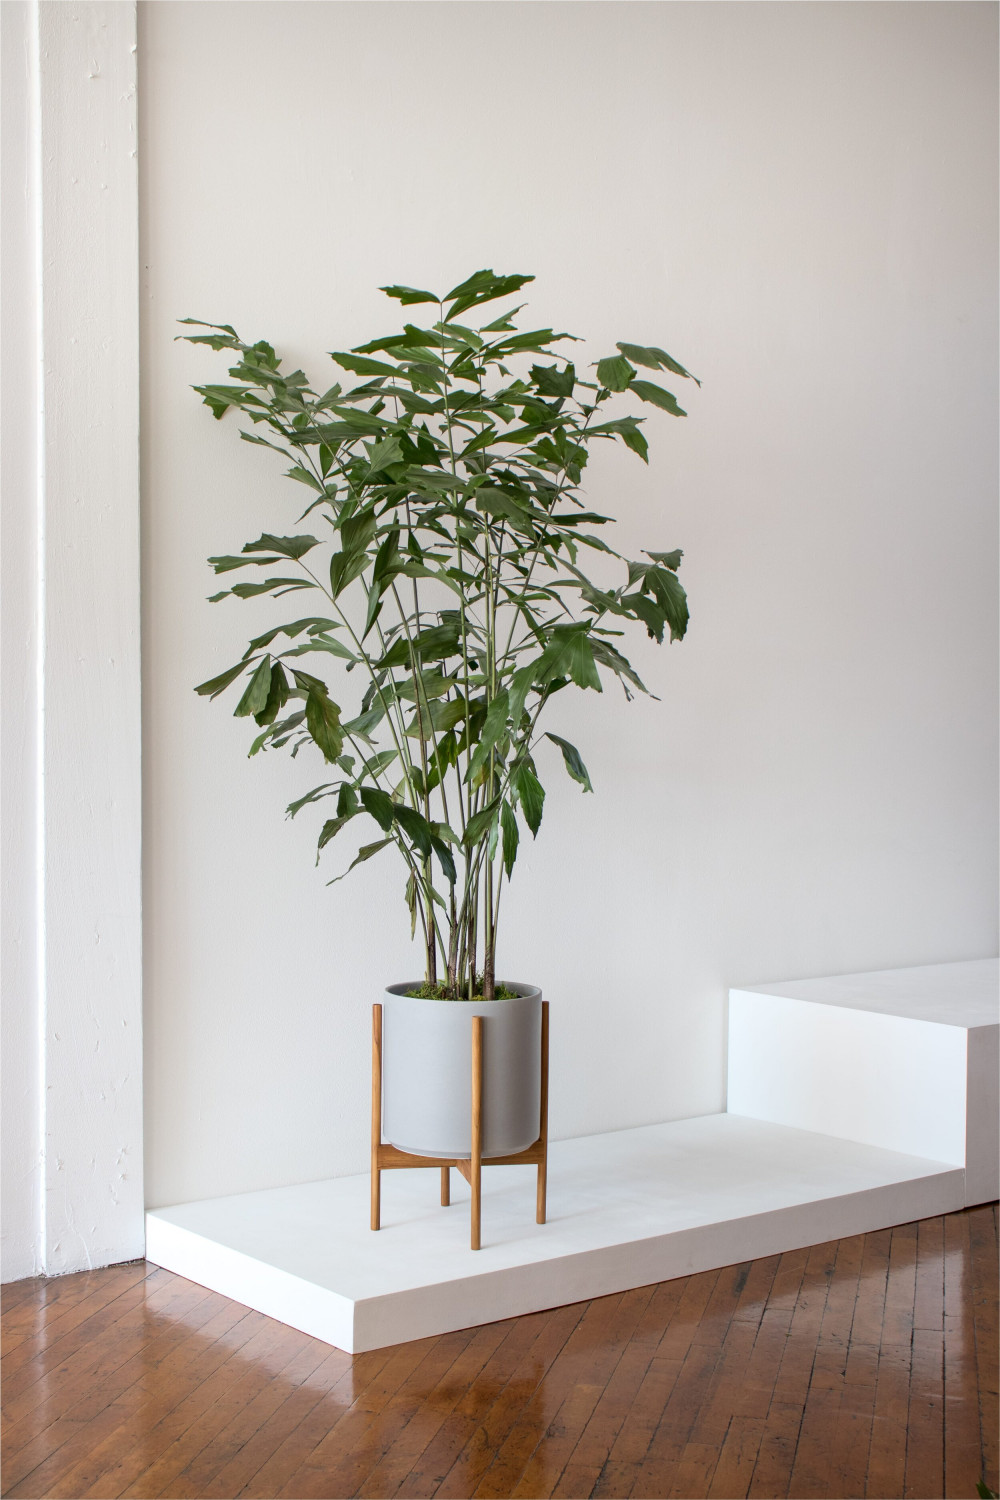 23 Big Houseplants To Make A Bold Statement In Your Living Room - 185